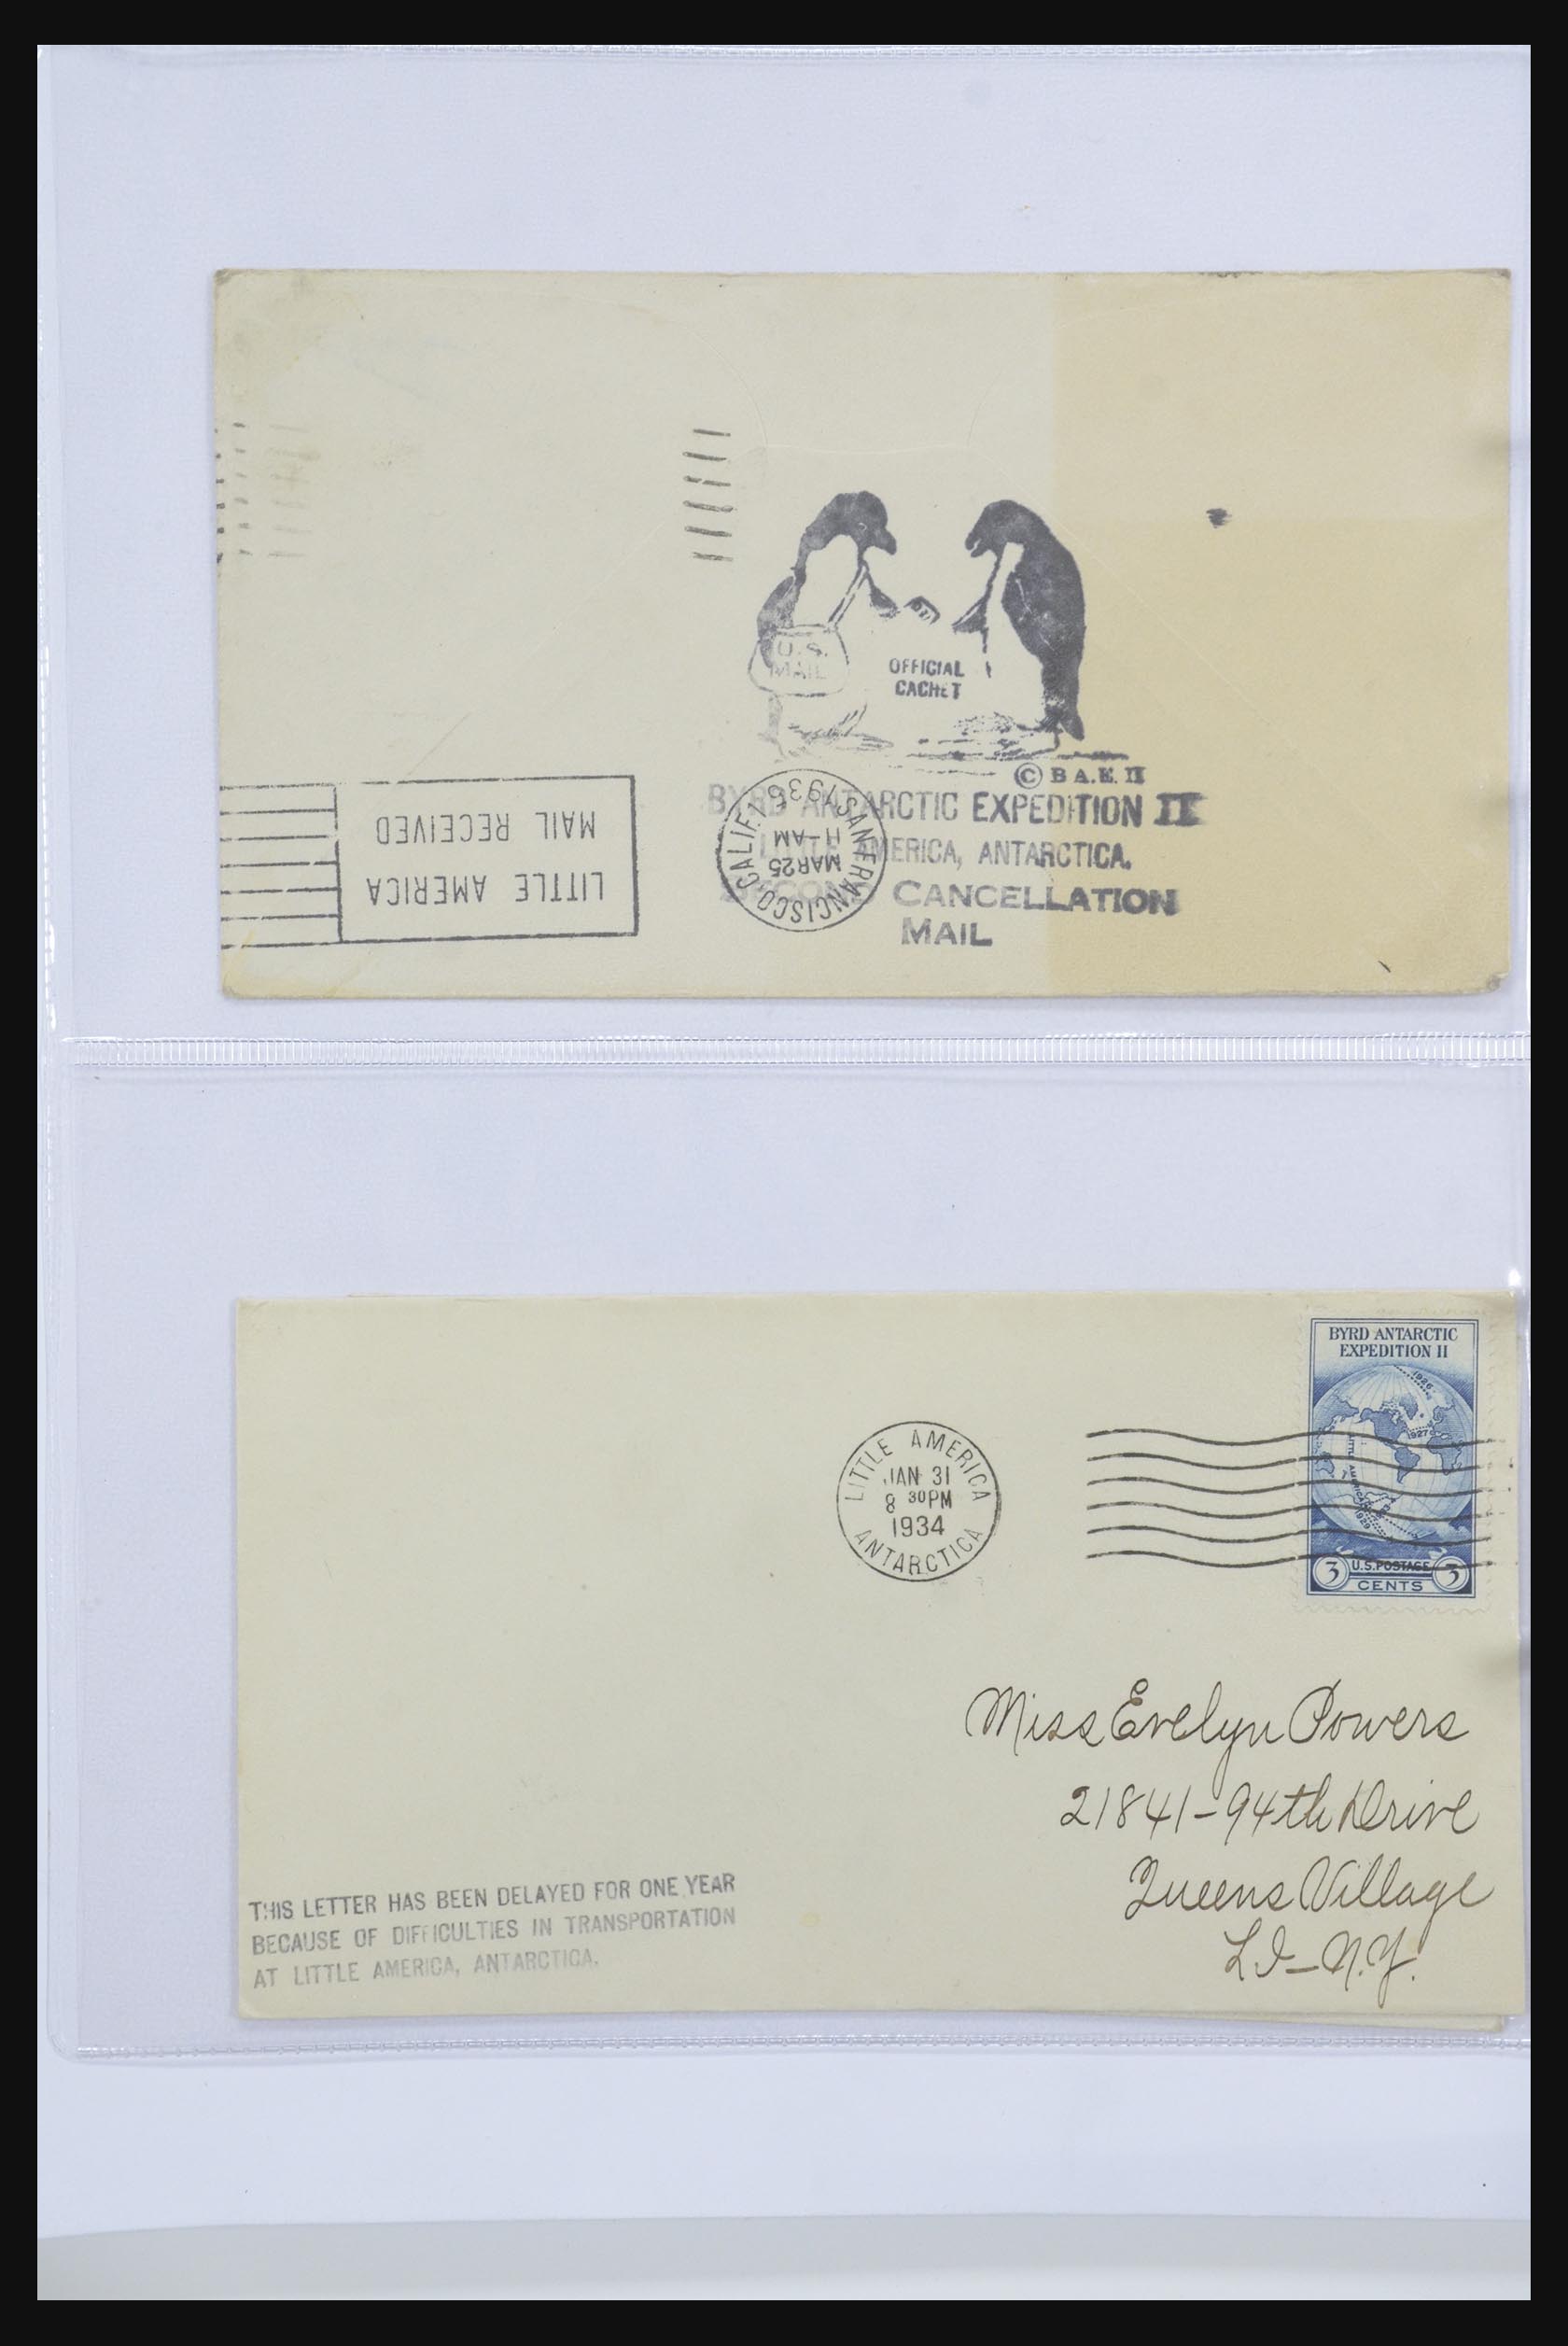 31627 004 - 31627 Byrd Antarctic Expedition 1934.